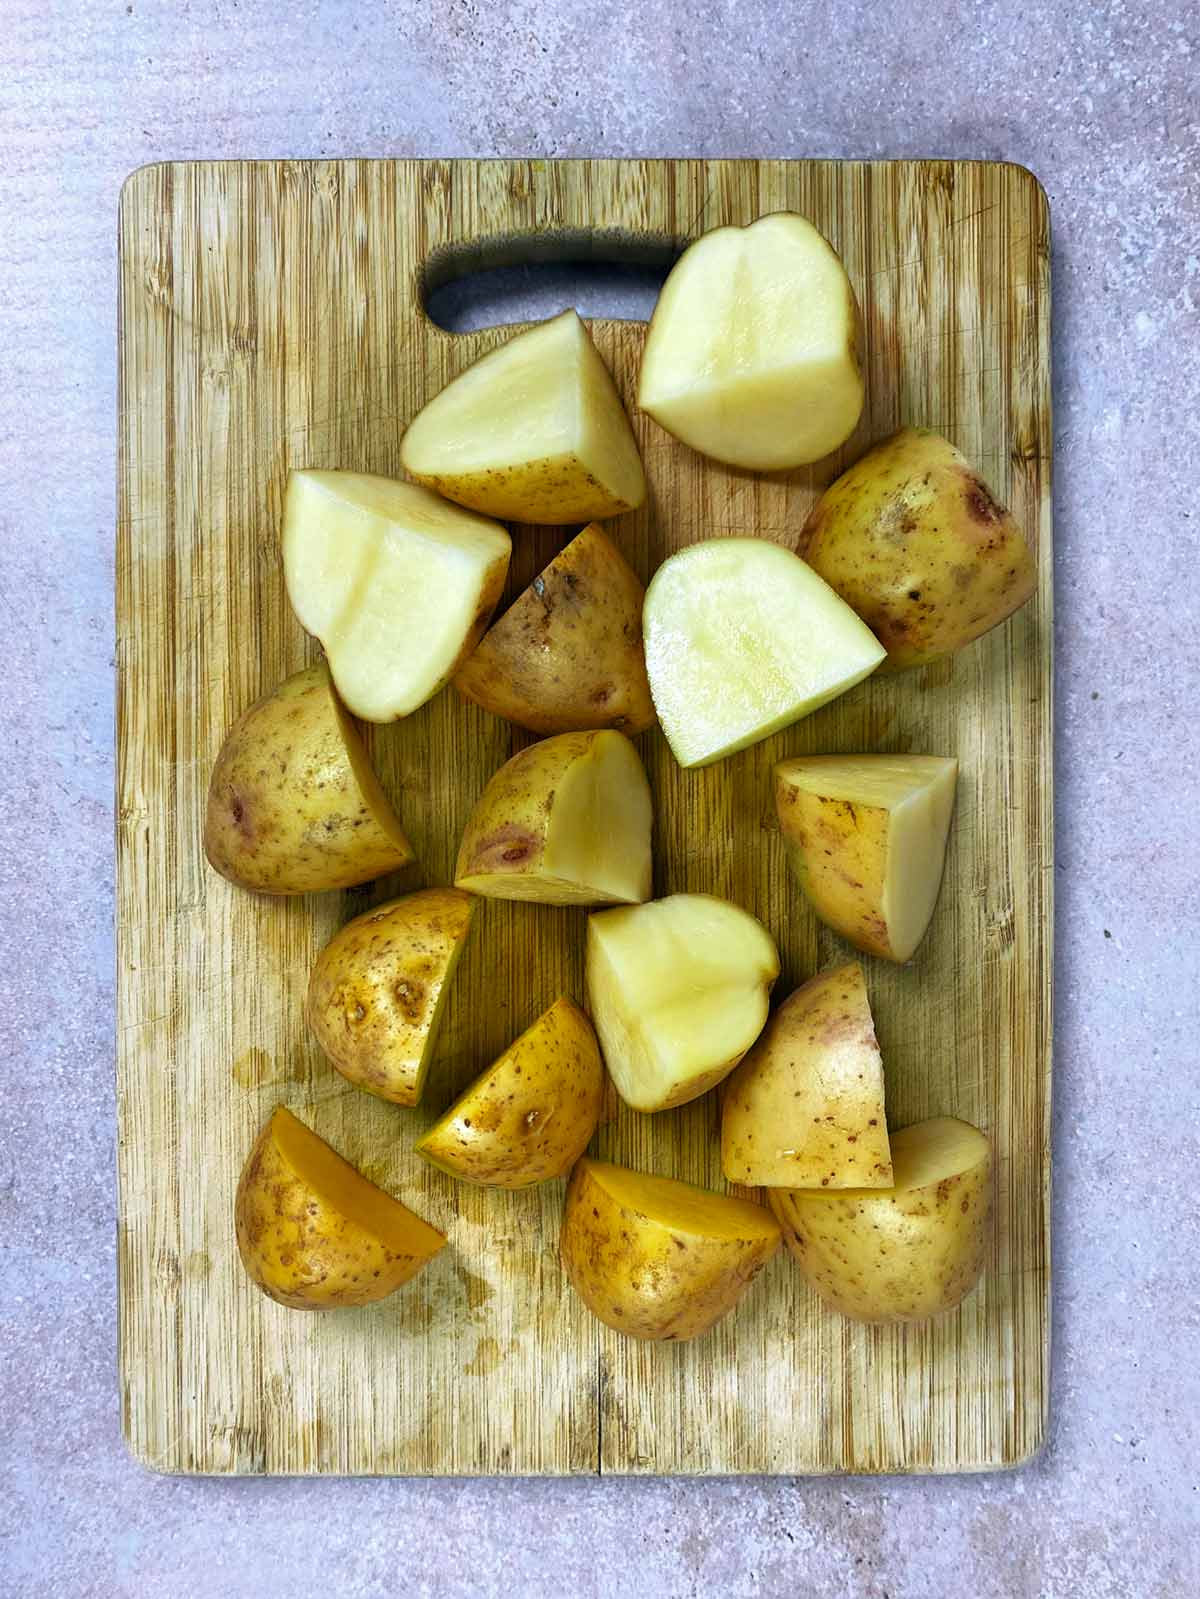 A chopping board with chopped potatoes on it.